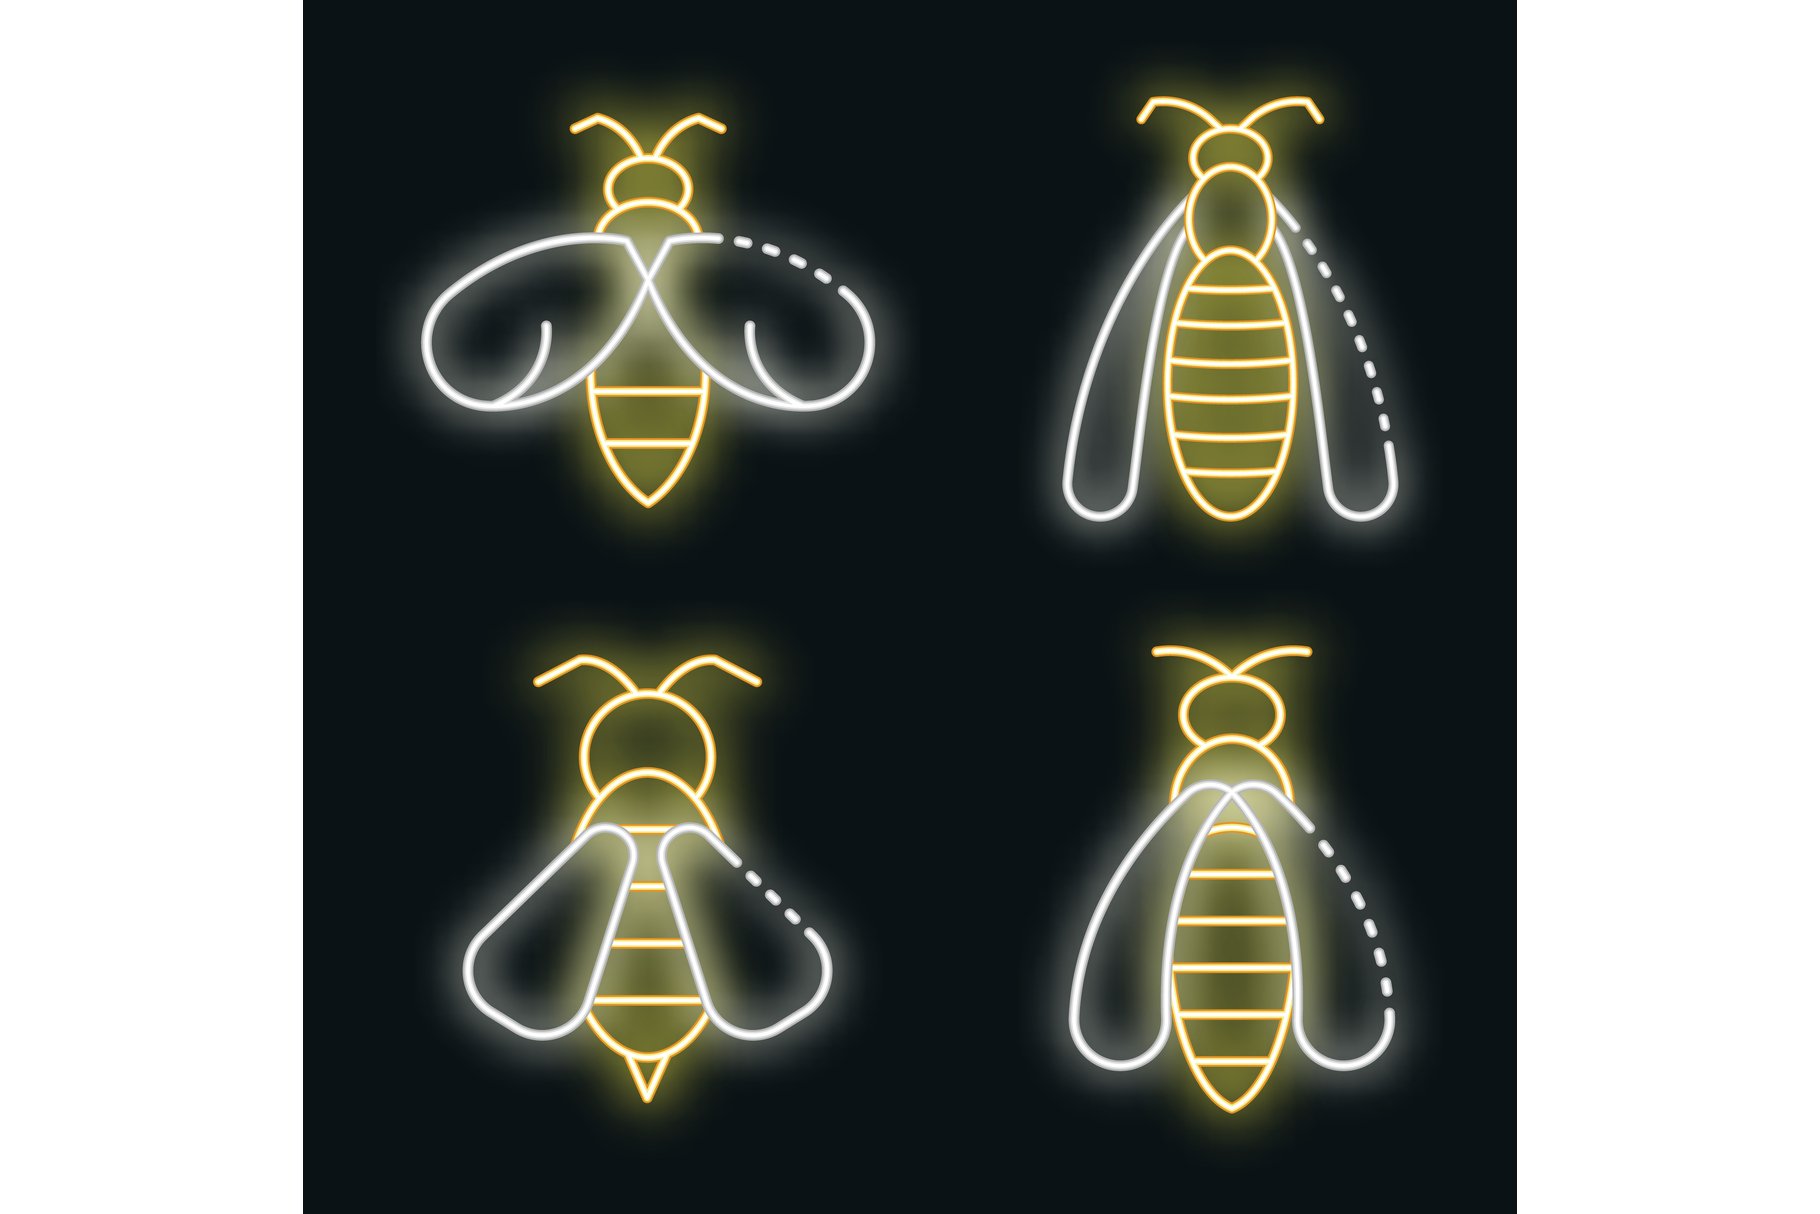 Wasp icons set vector neon cover image.